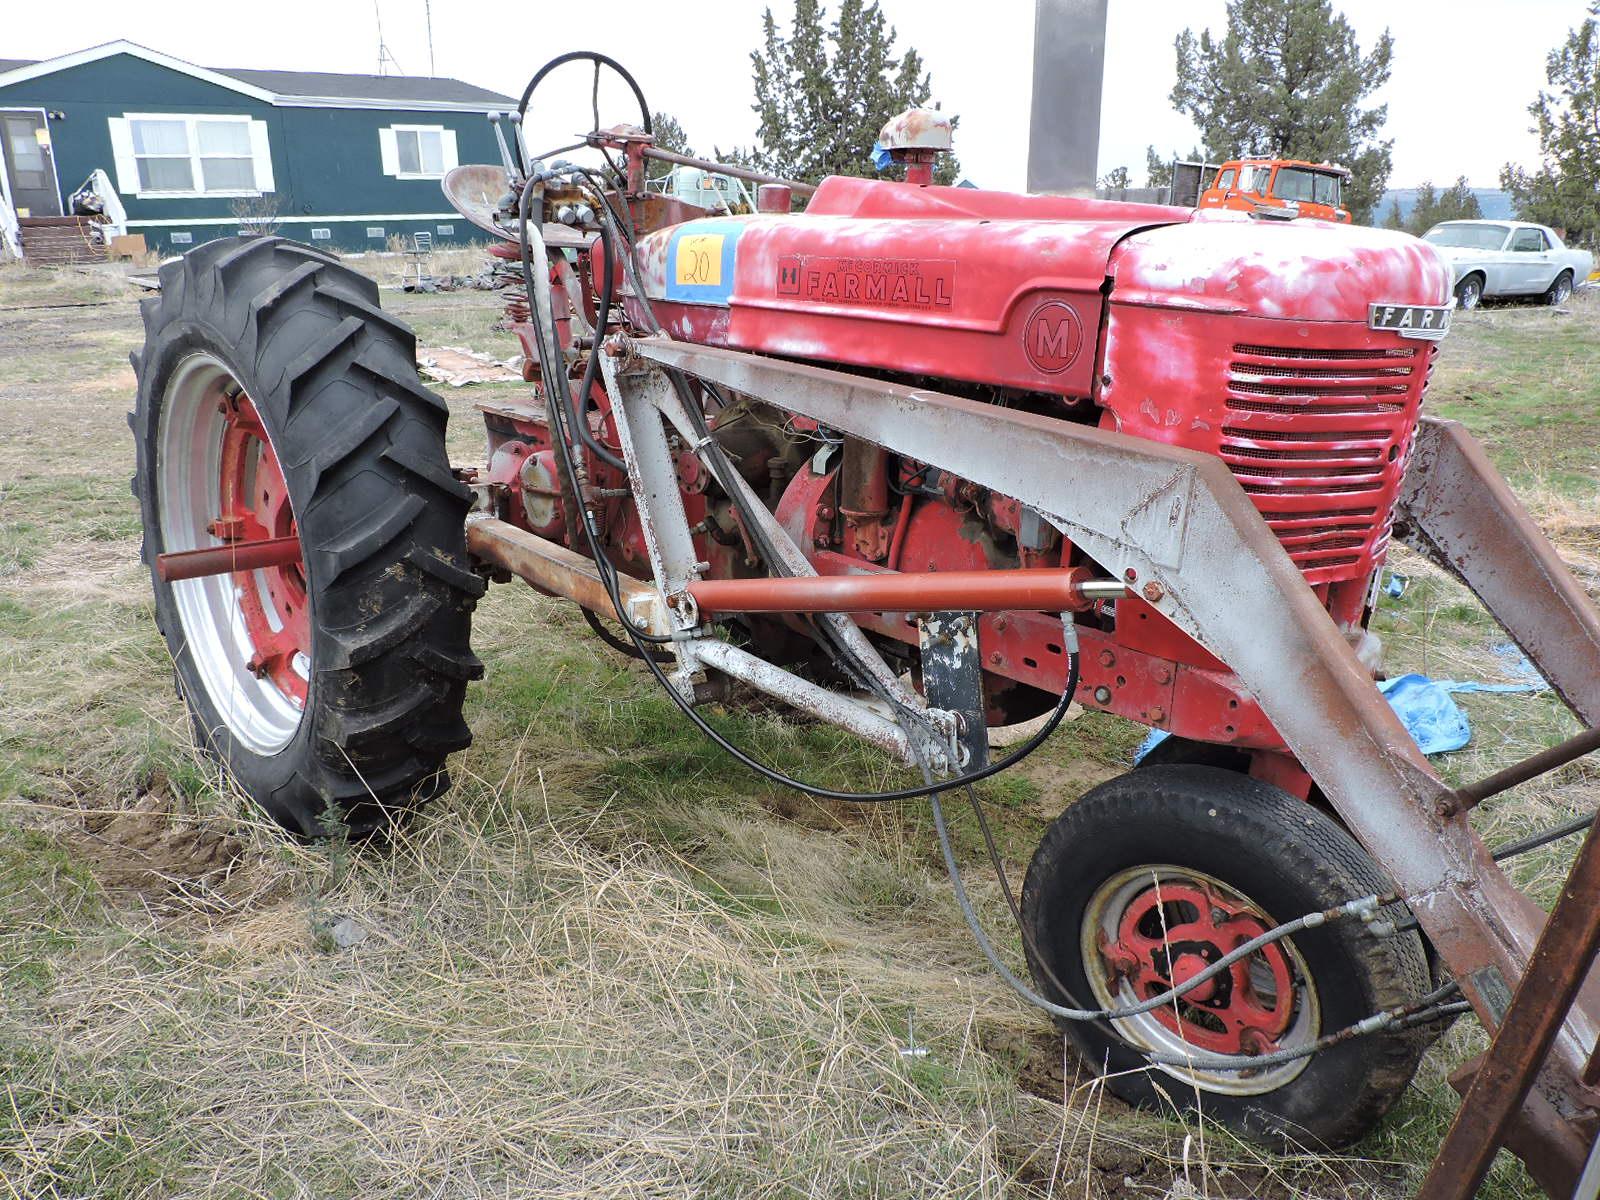 IH FARMALL - Model: 'M' Tractor with Loading Bucket